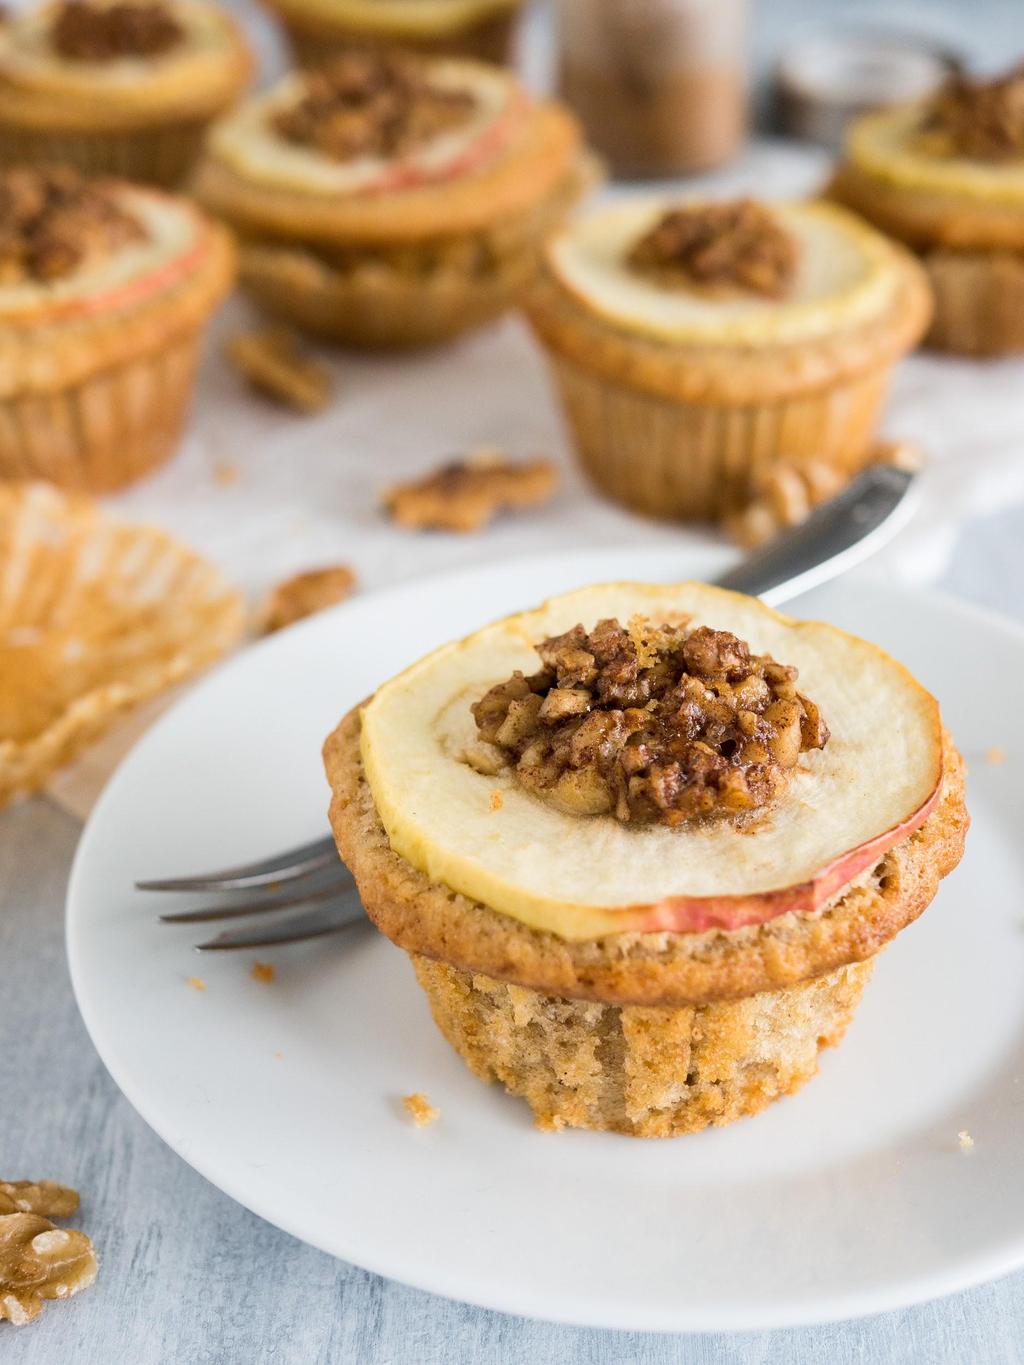 Apple Cinnamon Muffins Apple Cinnamon Muffins are made brown butter and topped caramelized walnuts! They have a secret filling which makes them extra moist and delicious.